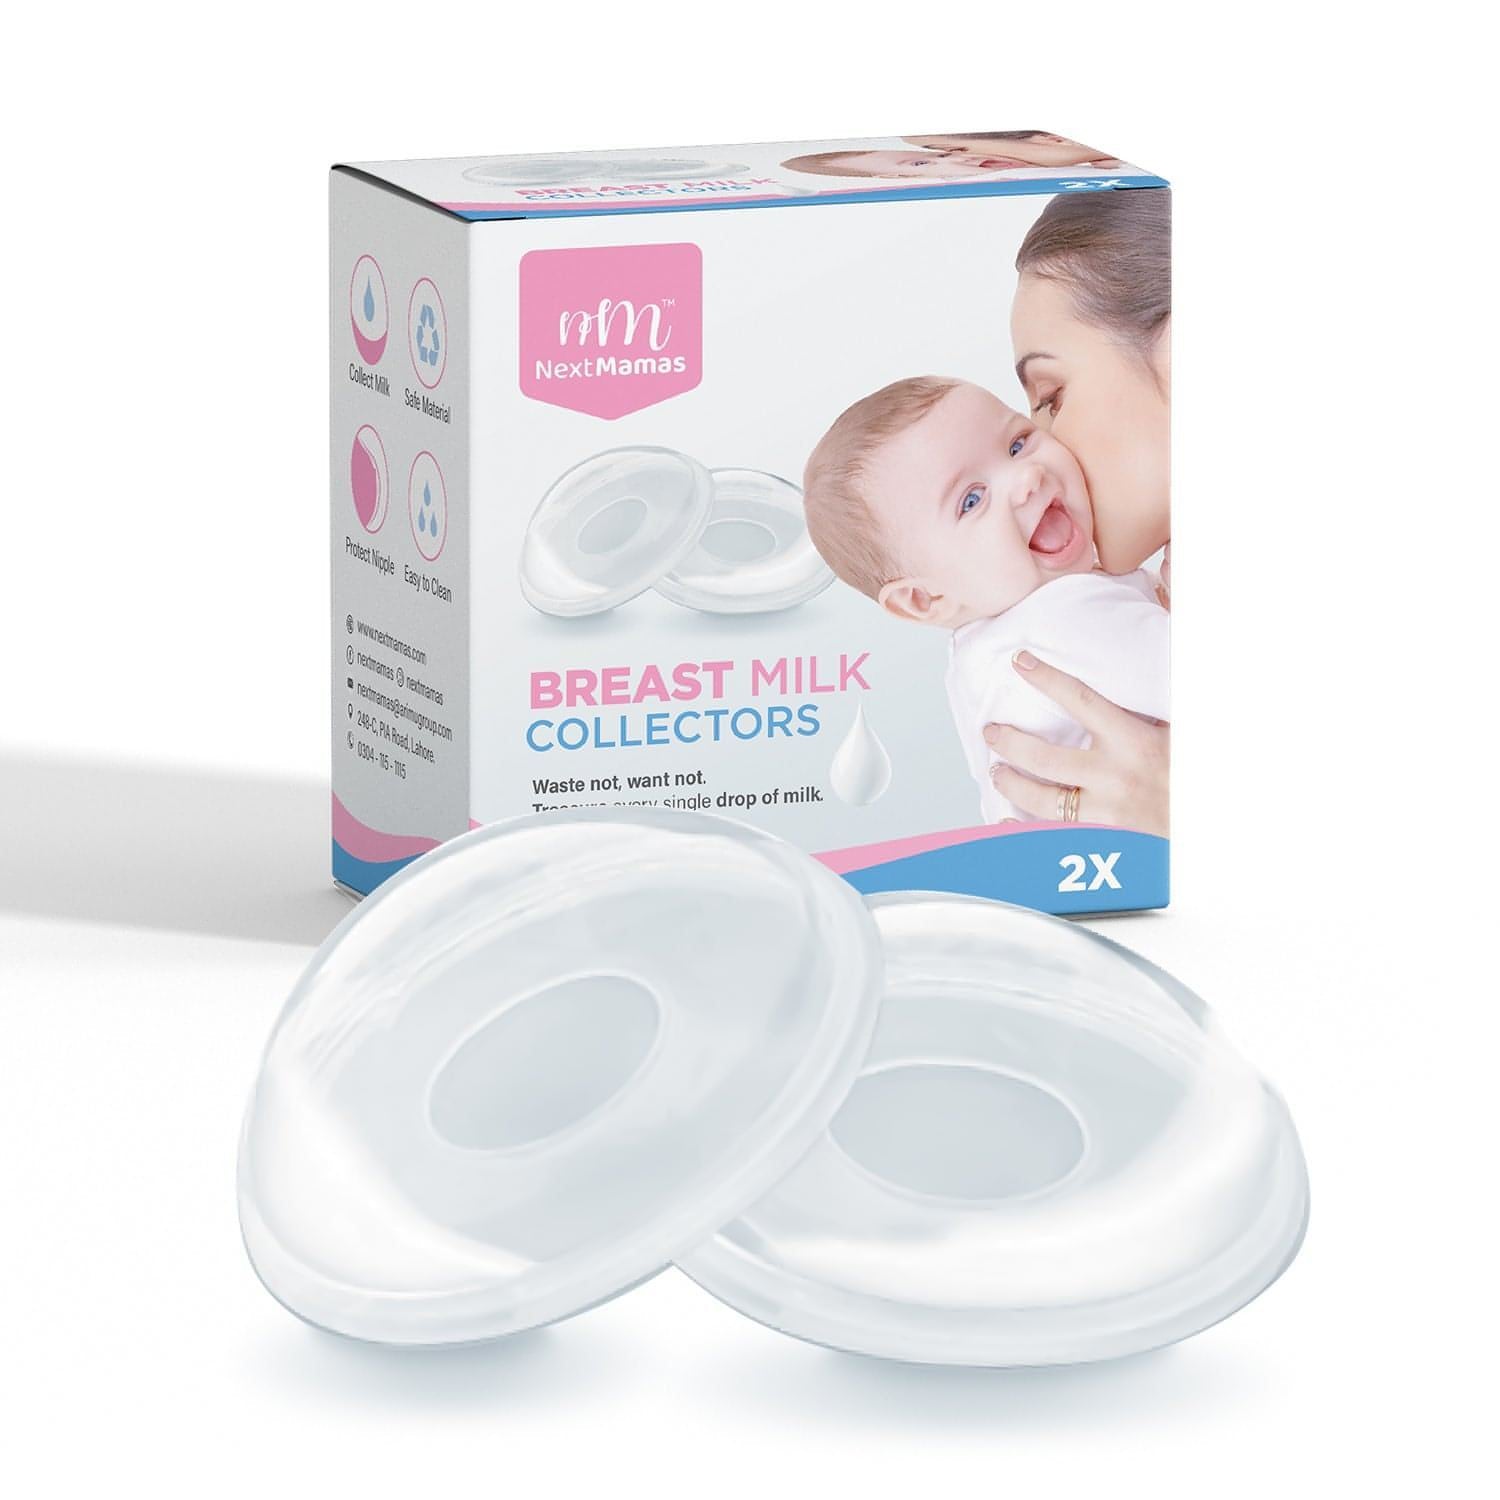  Breast Shells, 4 Pack Nursing Cups, Milk Saver, Protect Sore  Nipples for Breastfeeding, Collect Breastmilk Leaks for Nursing Moms, Soft  and Flexible Silicone Material, Reusable : Baby